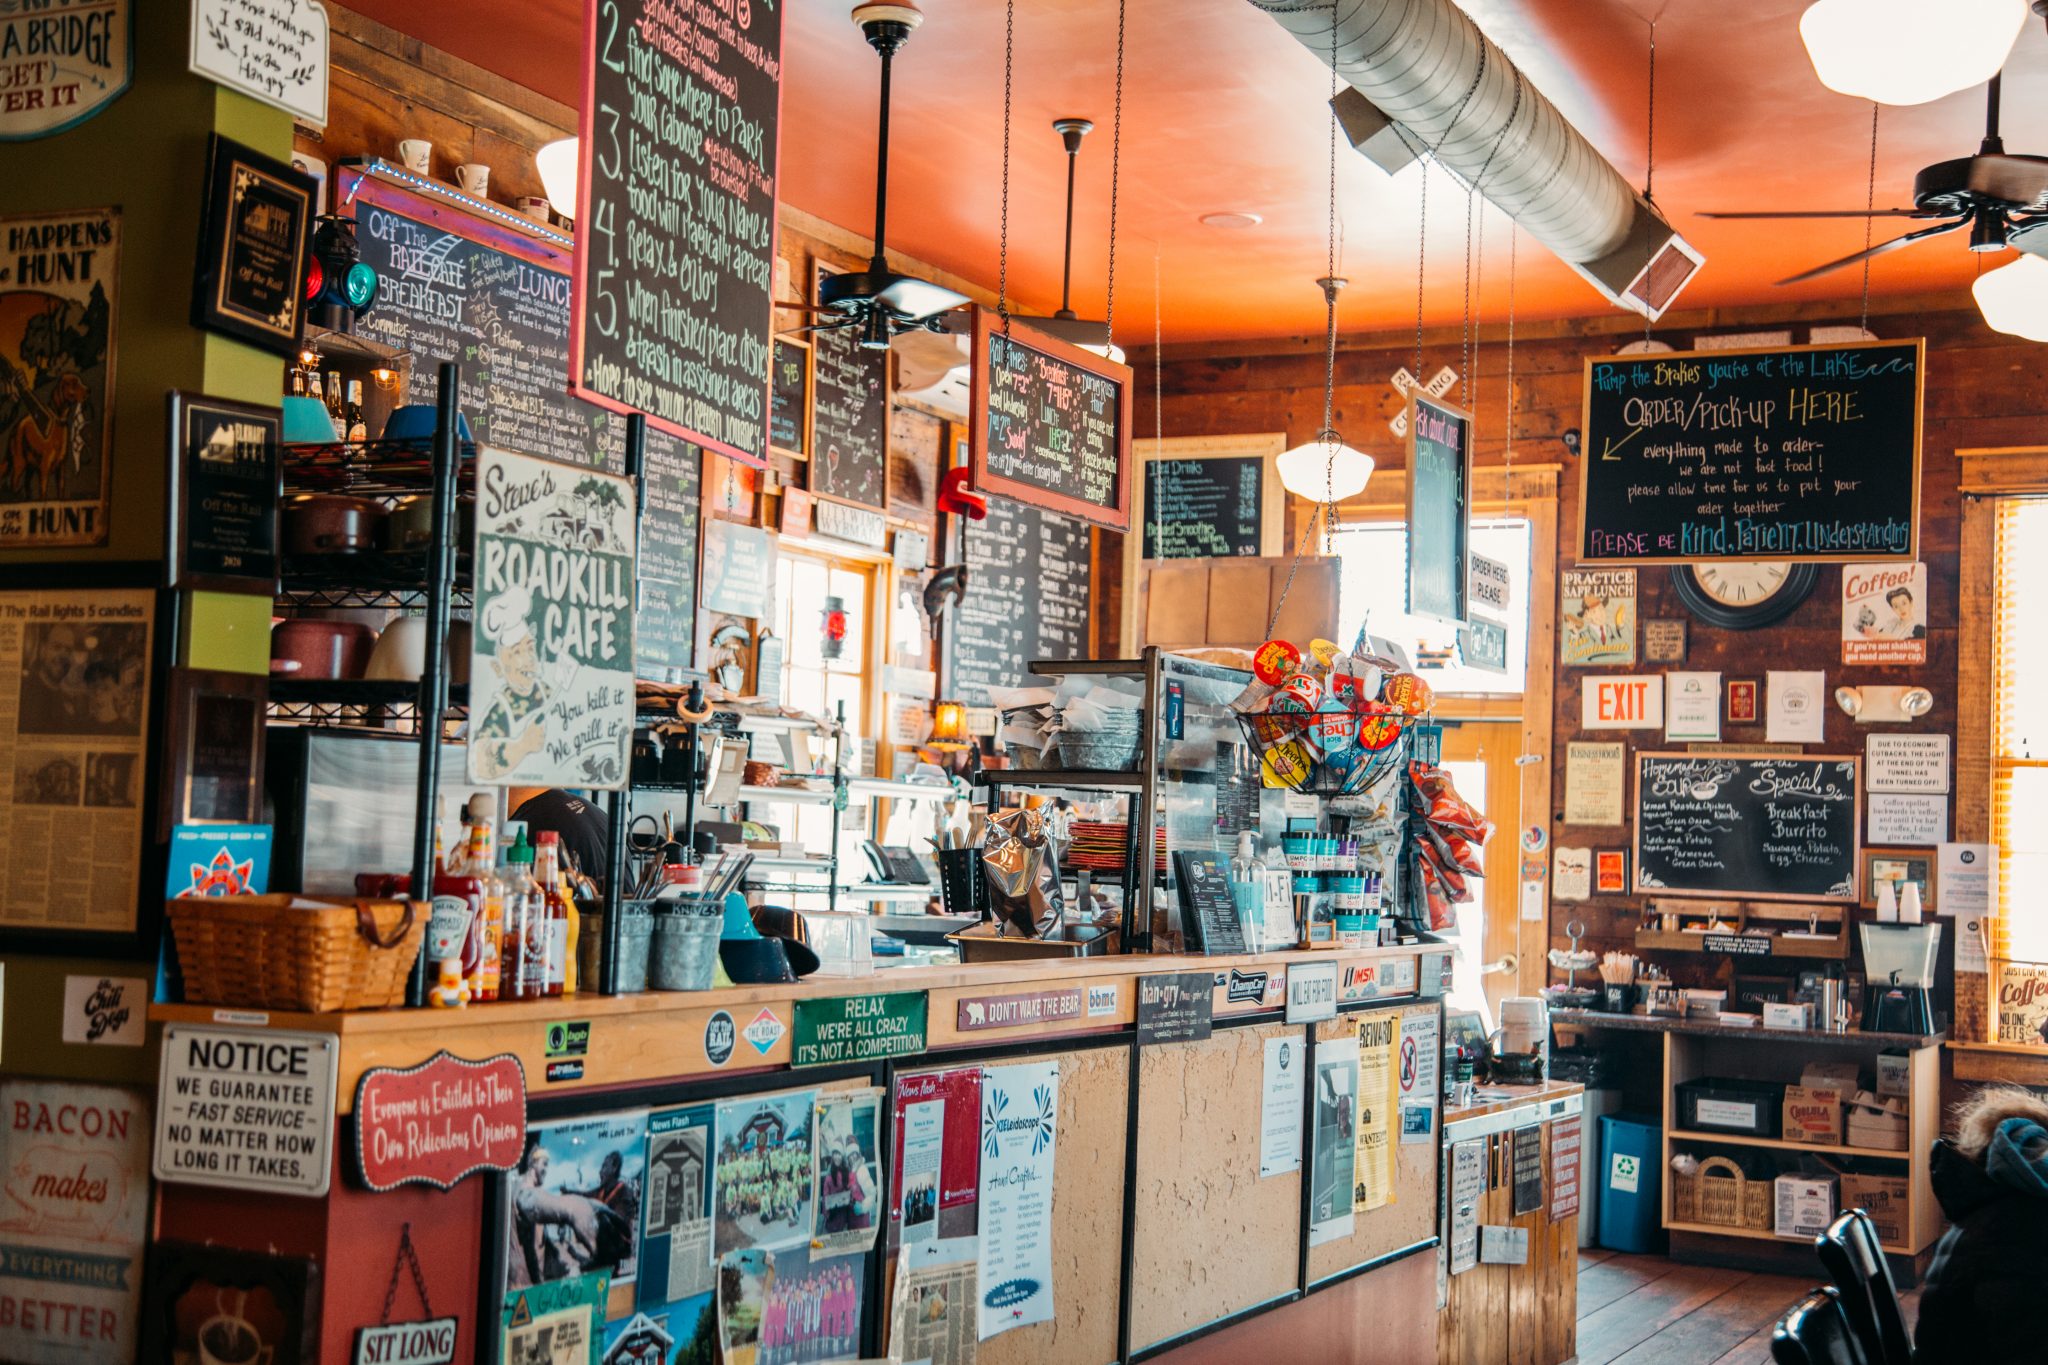 The inside of Off The Rail in Elkhart Lake is a small cafe with walls and counters covered in colorful signage and flyers.